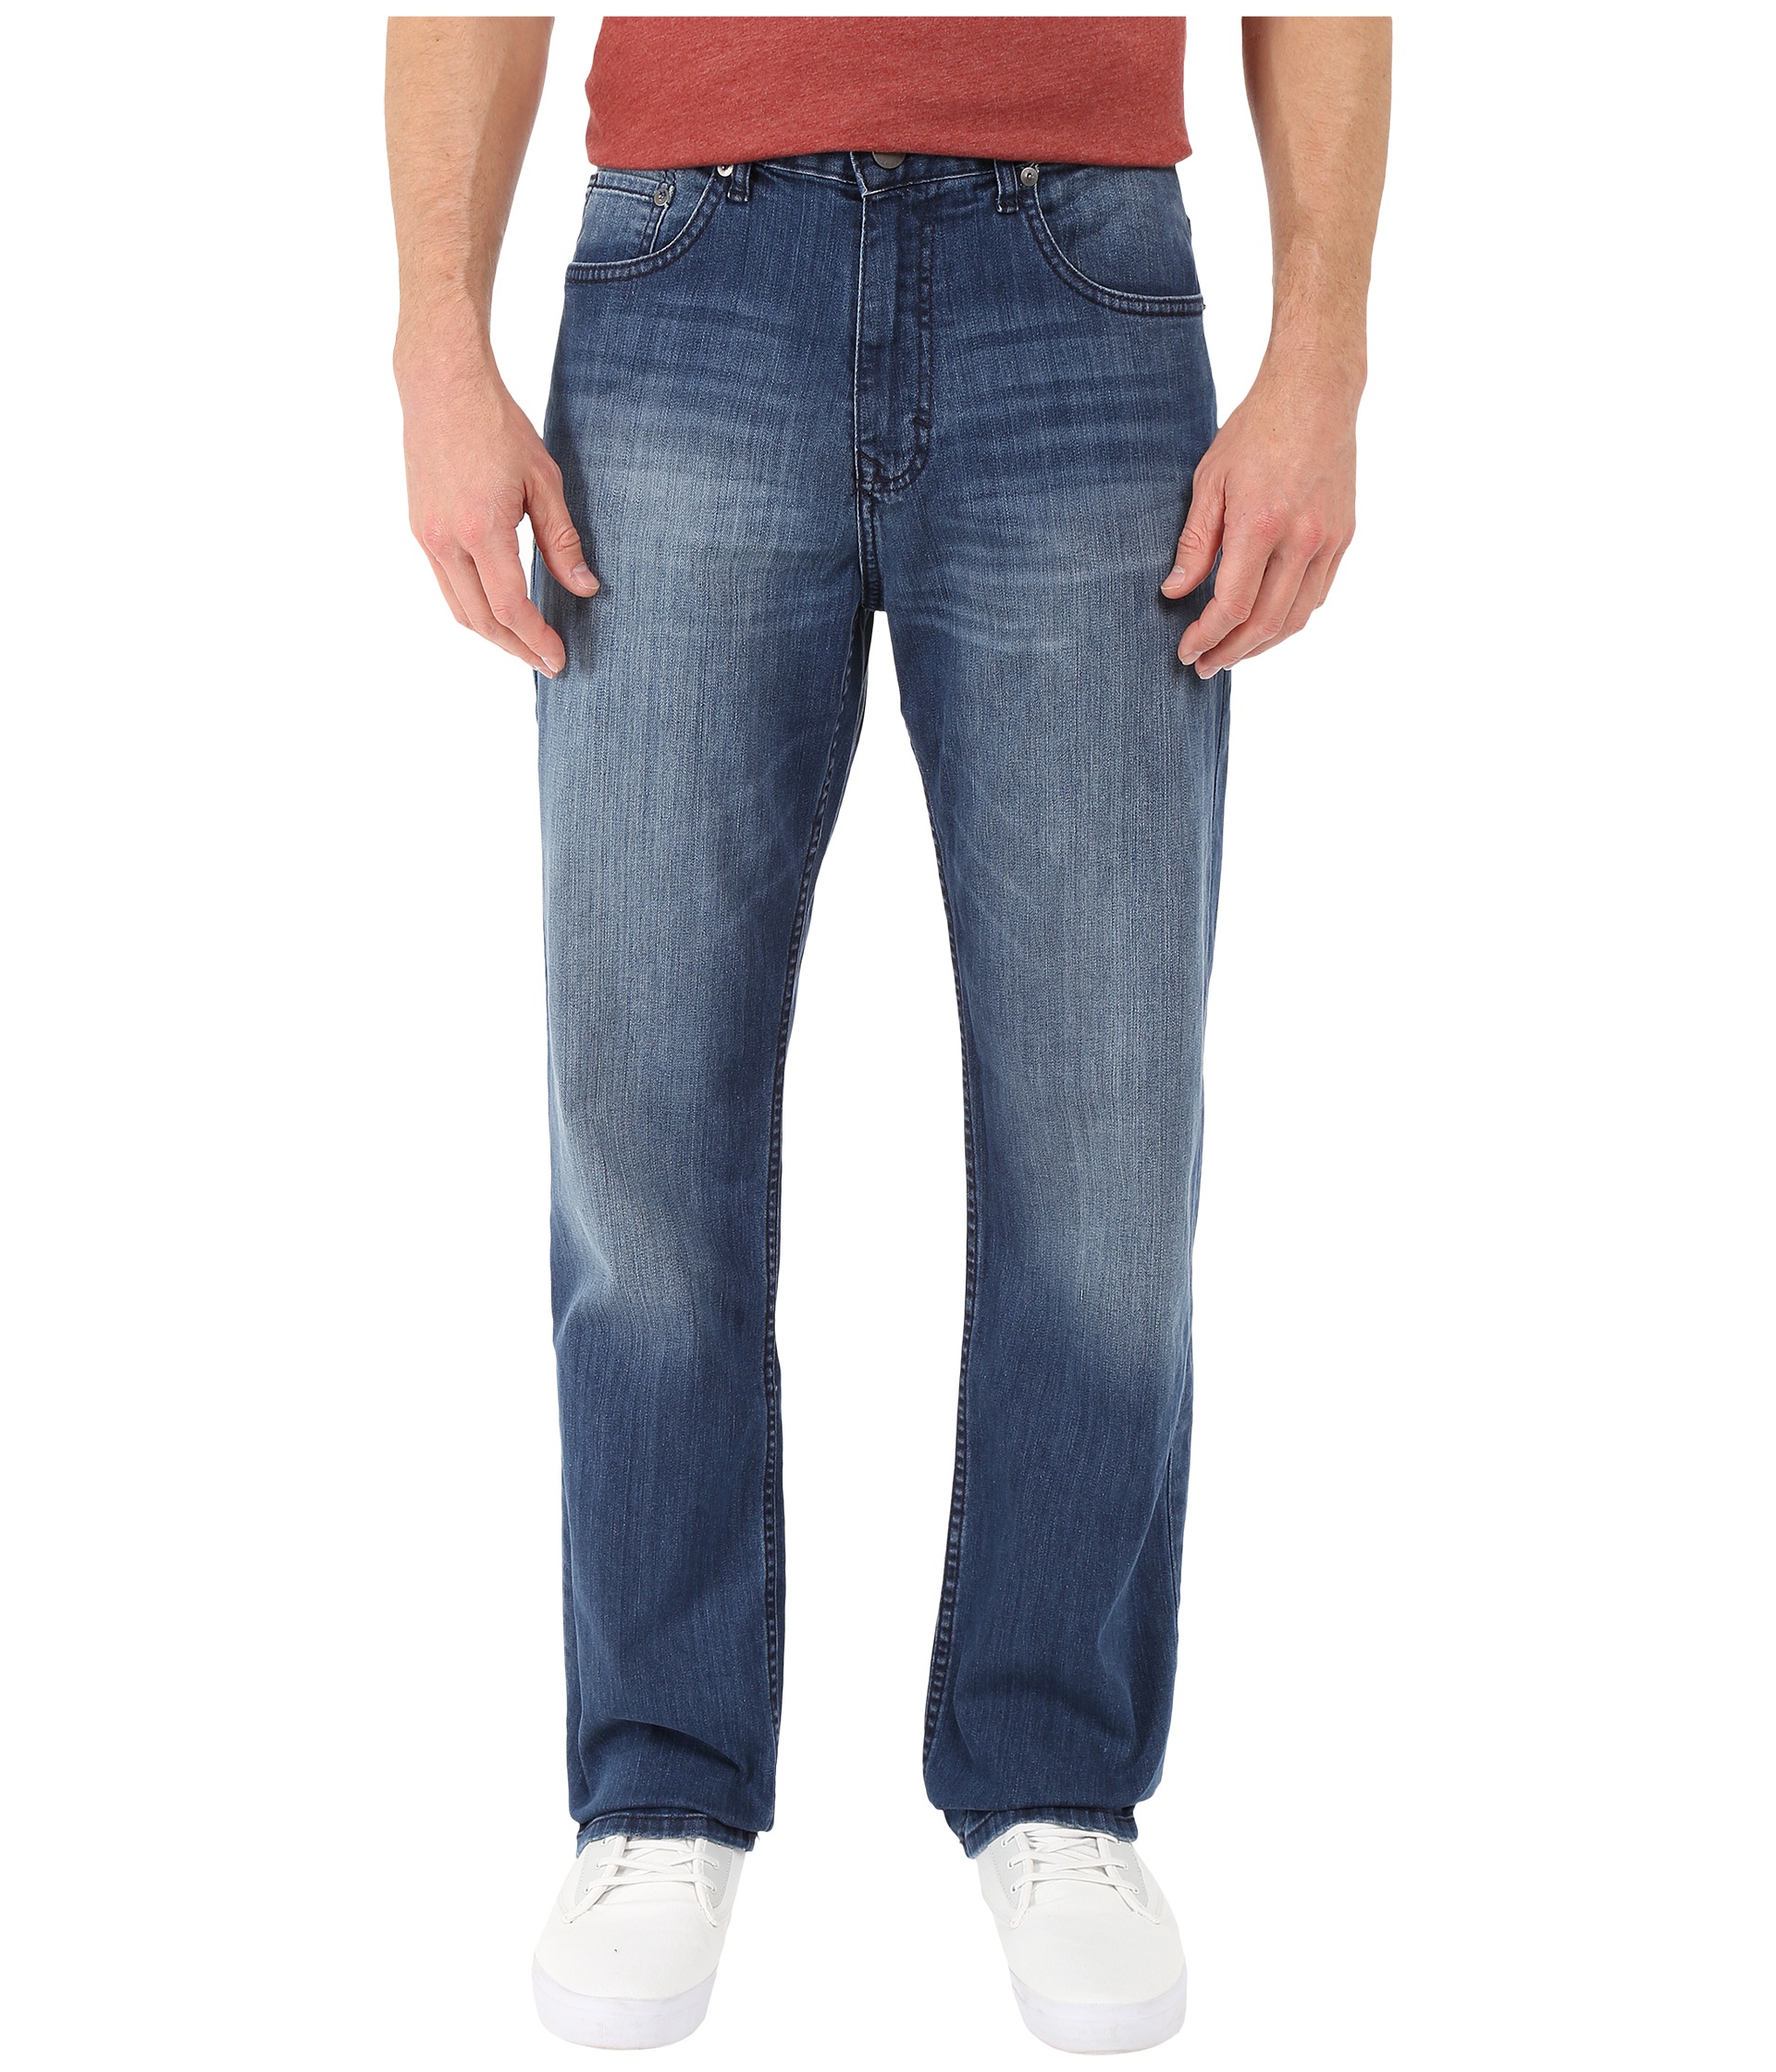 Calvin Klein Jeans Relaxed Straight Jean in Cove Wash at Zappos.com